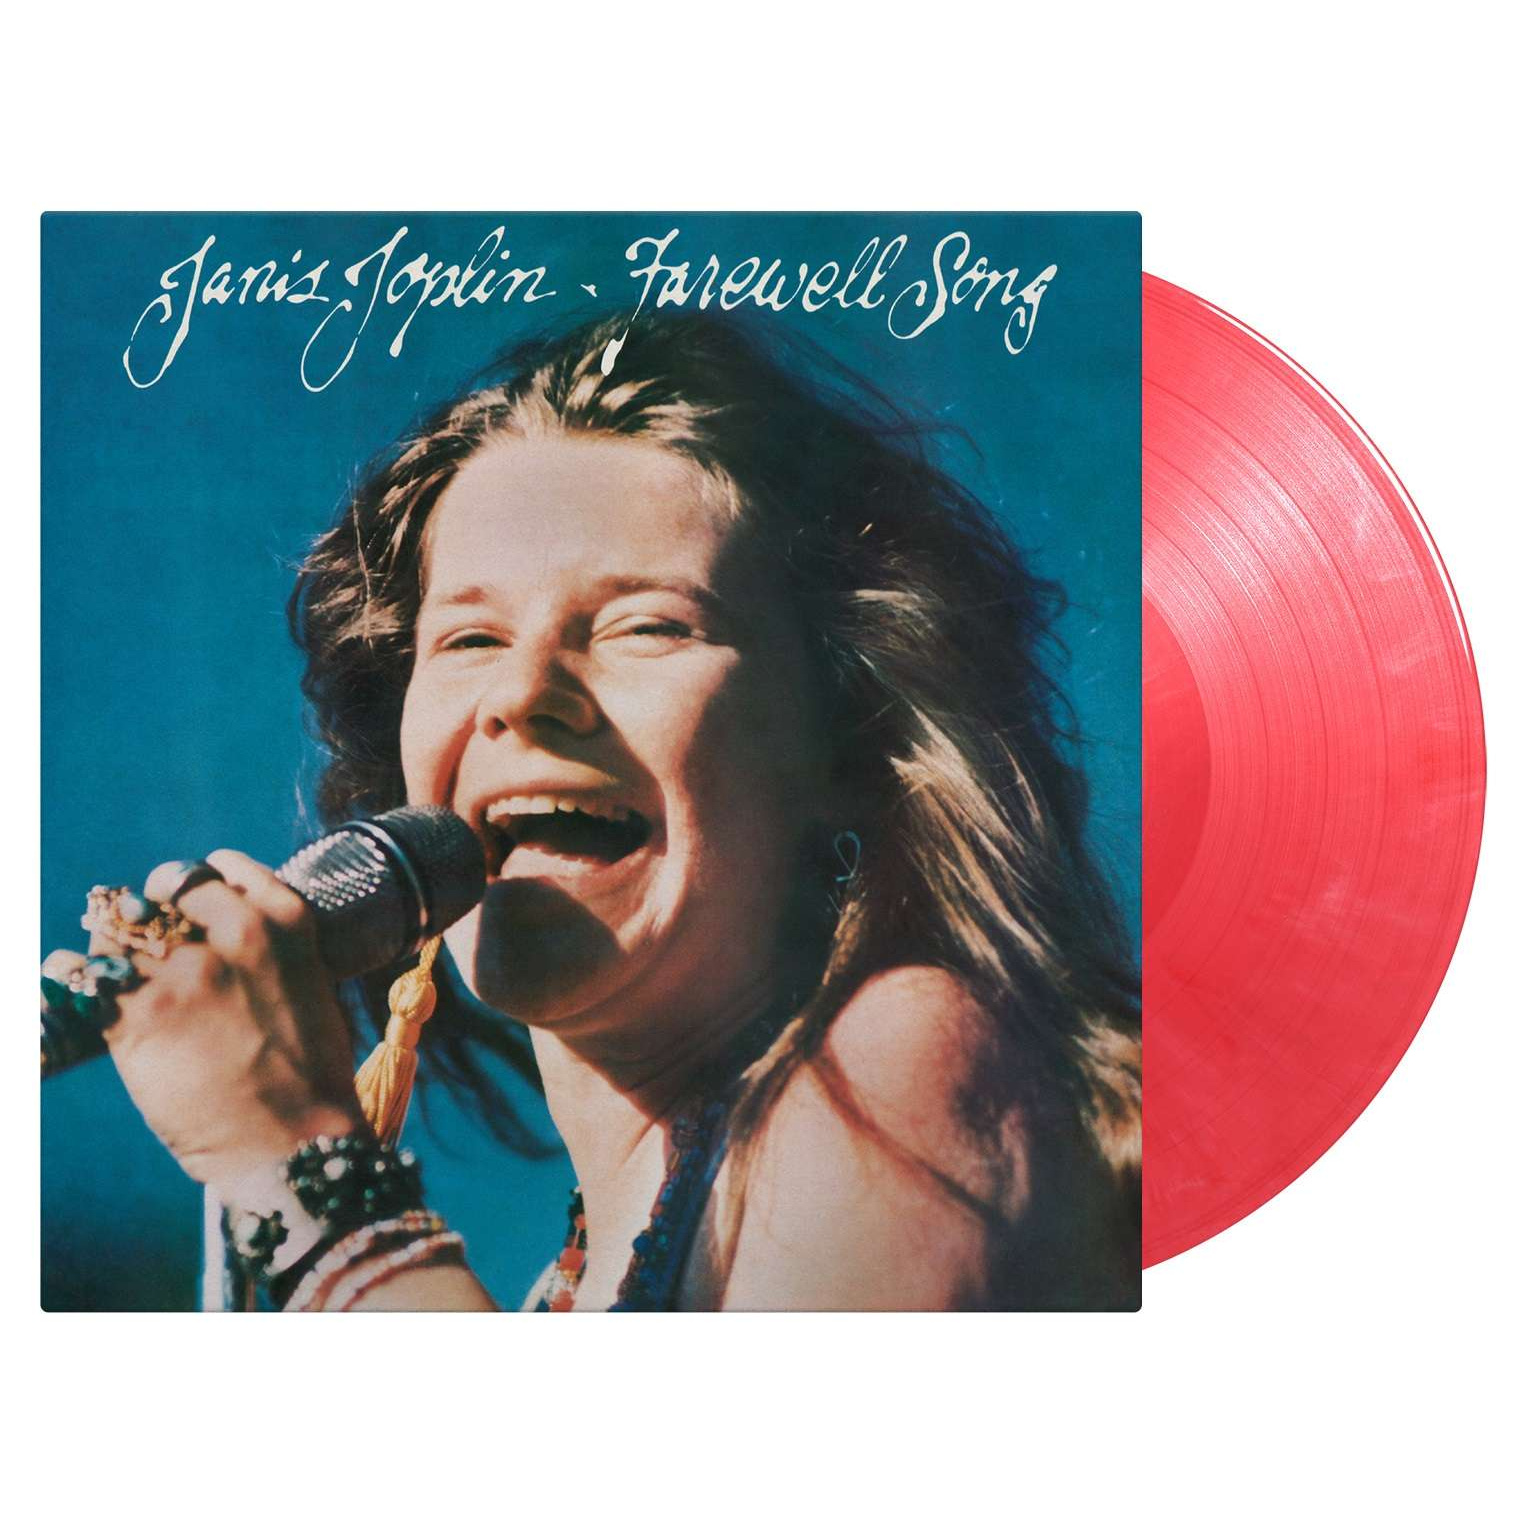 FAREWELL SONG -COLOURED-180GR / DELUXE SLEEVE / 2000 CPS RED & WHITE MARBLED VI